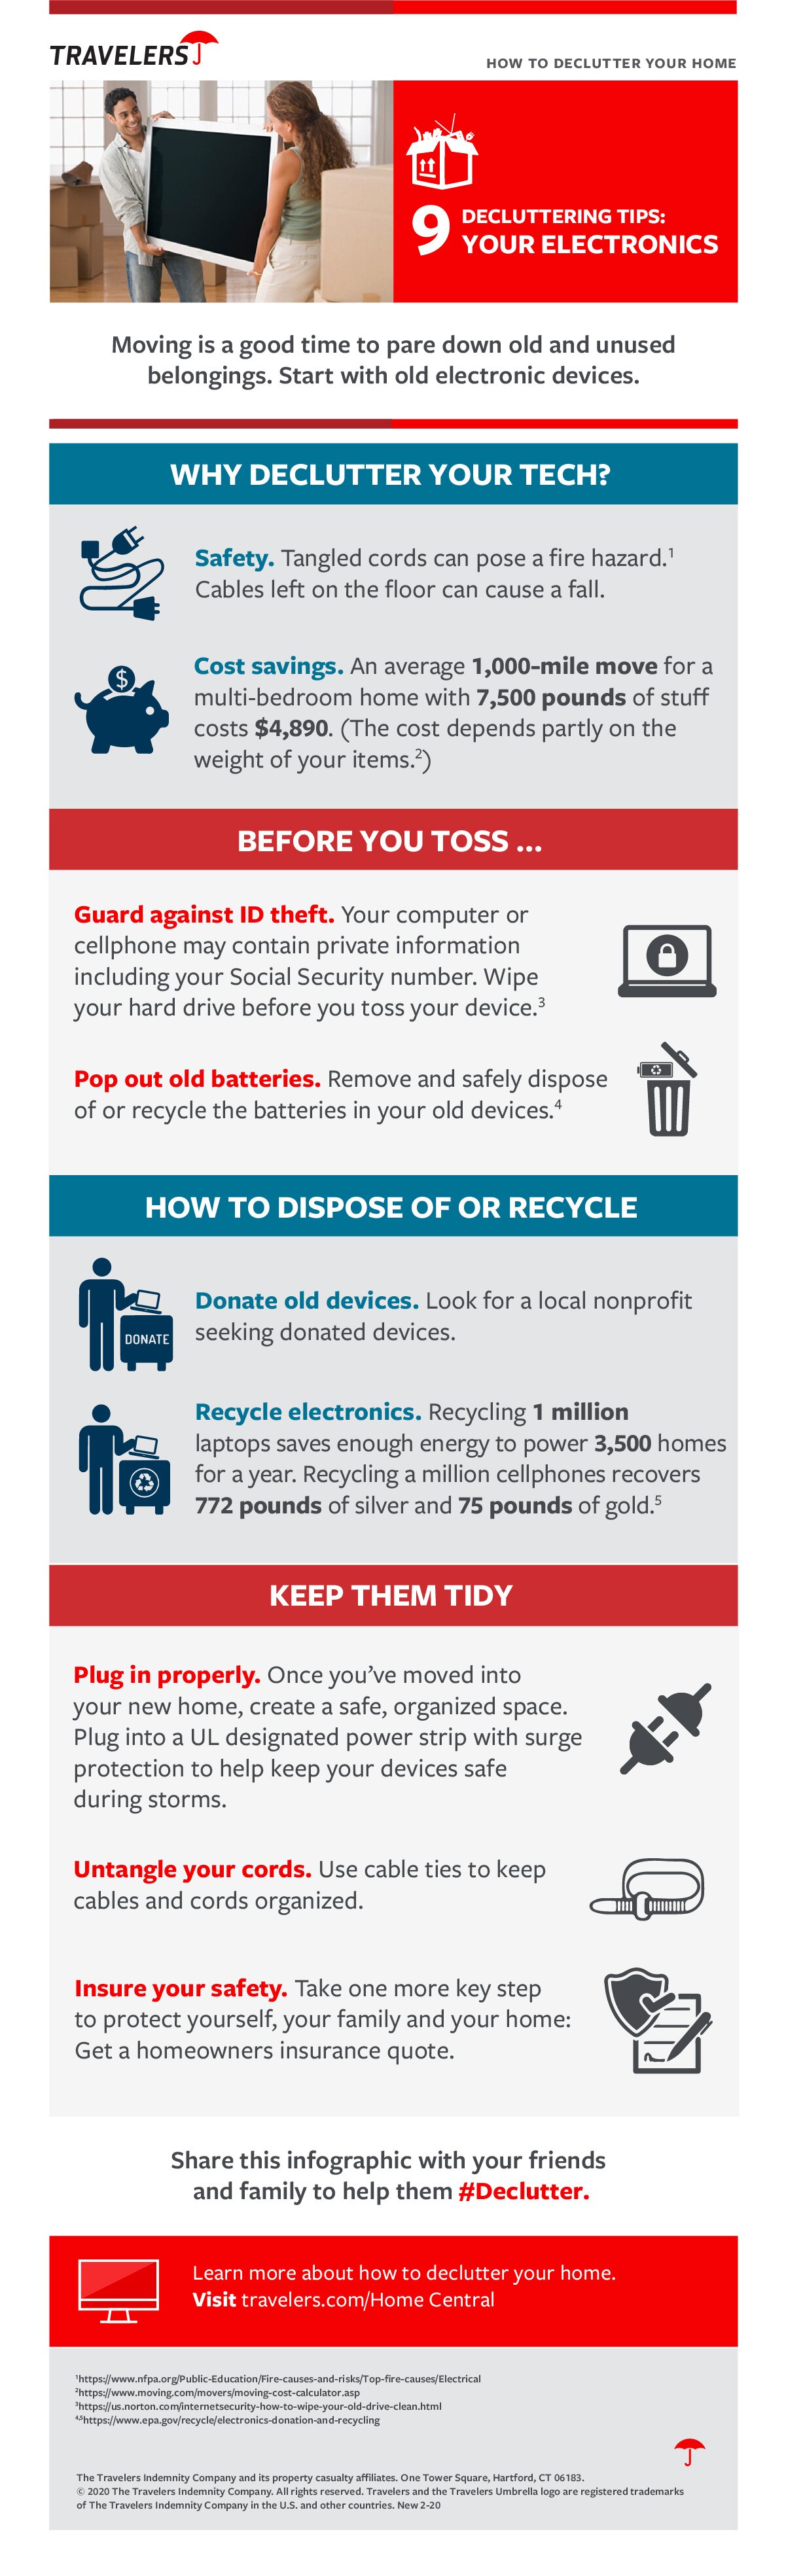 Infographic detailing how to declutter and recycle your electronics before you move